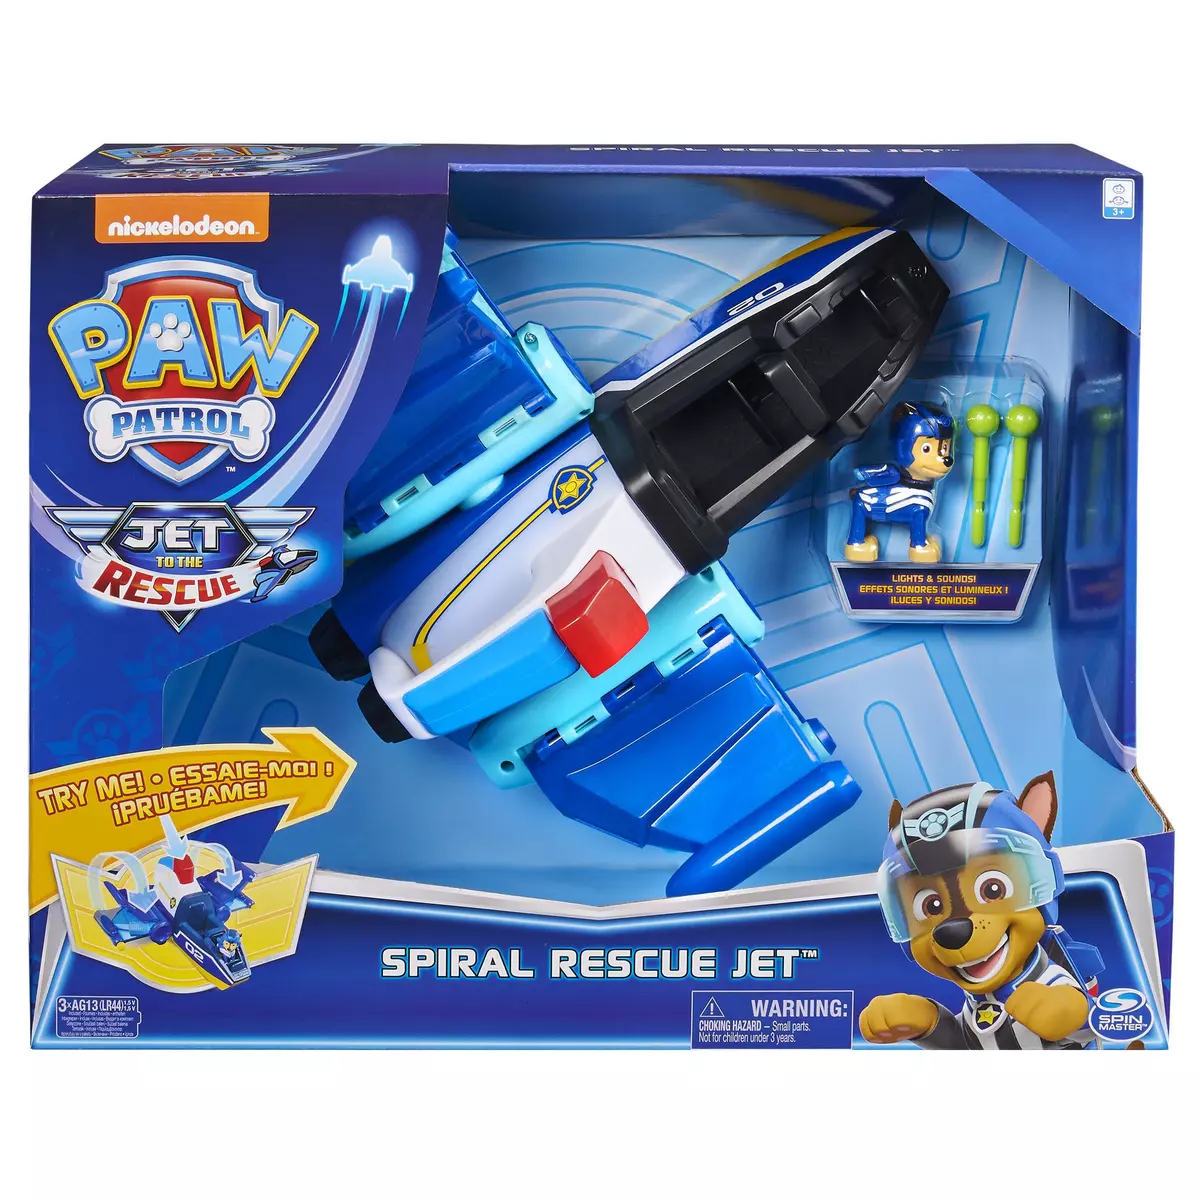 SPIN MASTER Avion Jet Deluxe Rescue Spiral + Figurine Chase - Pat'  Patrouille pas cher 